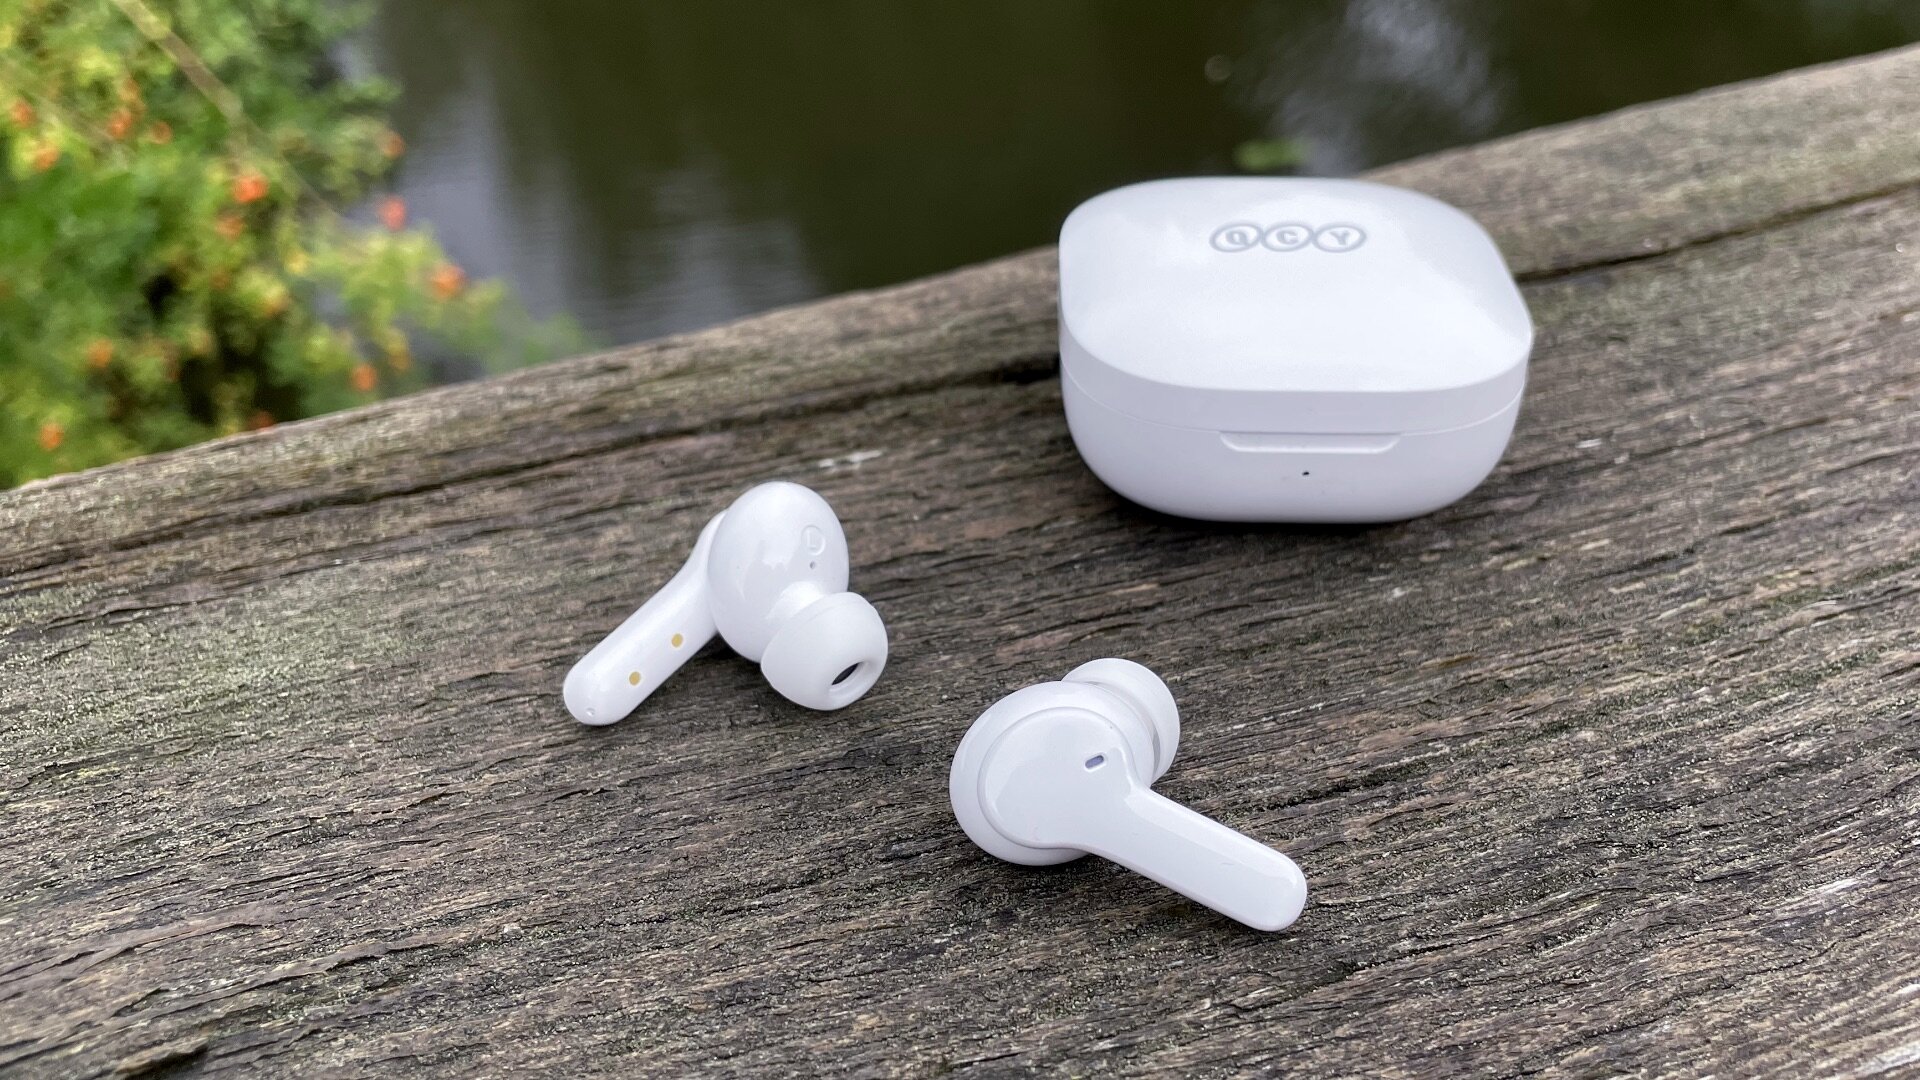 QCY T13 review: The new best ultra-cheap earbuds